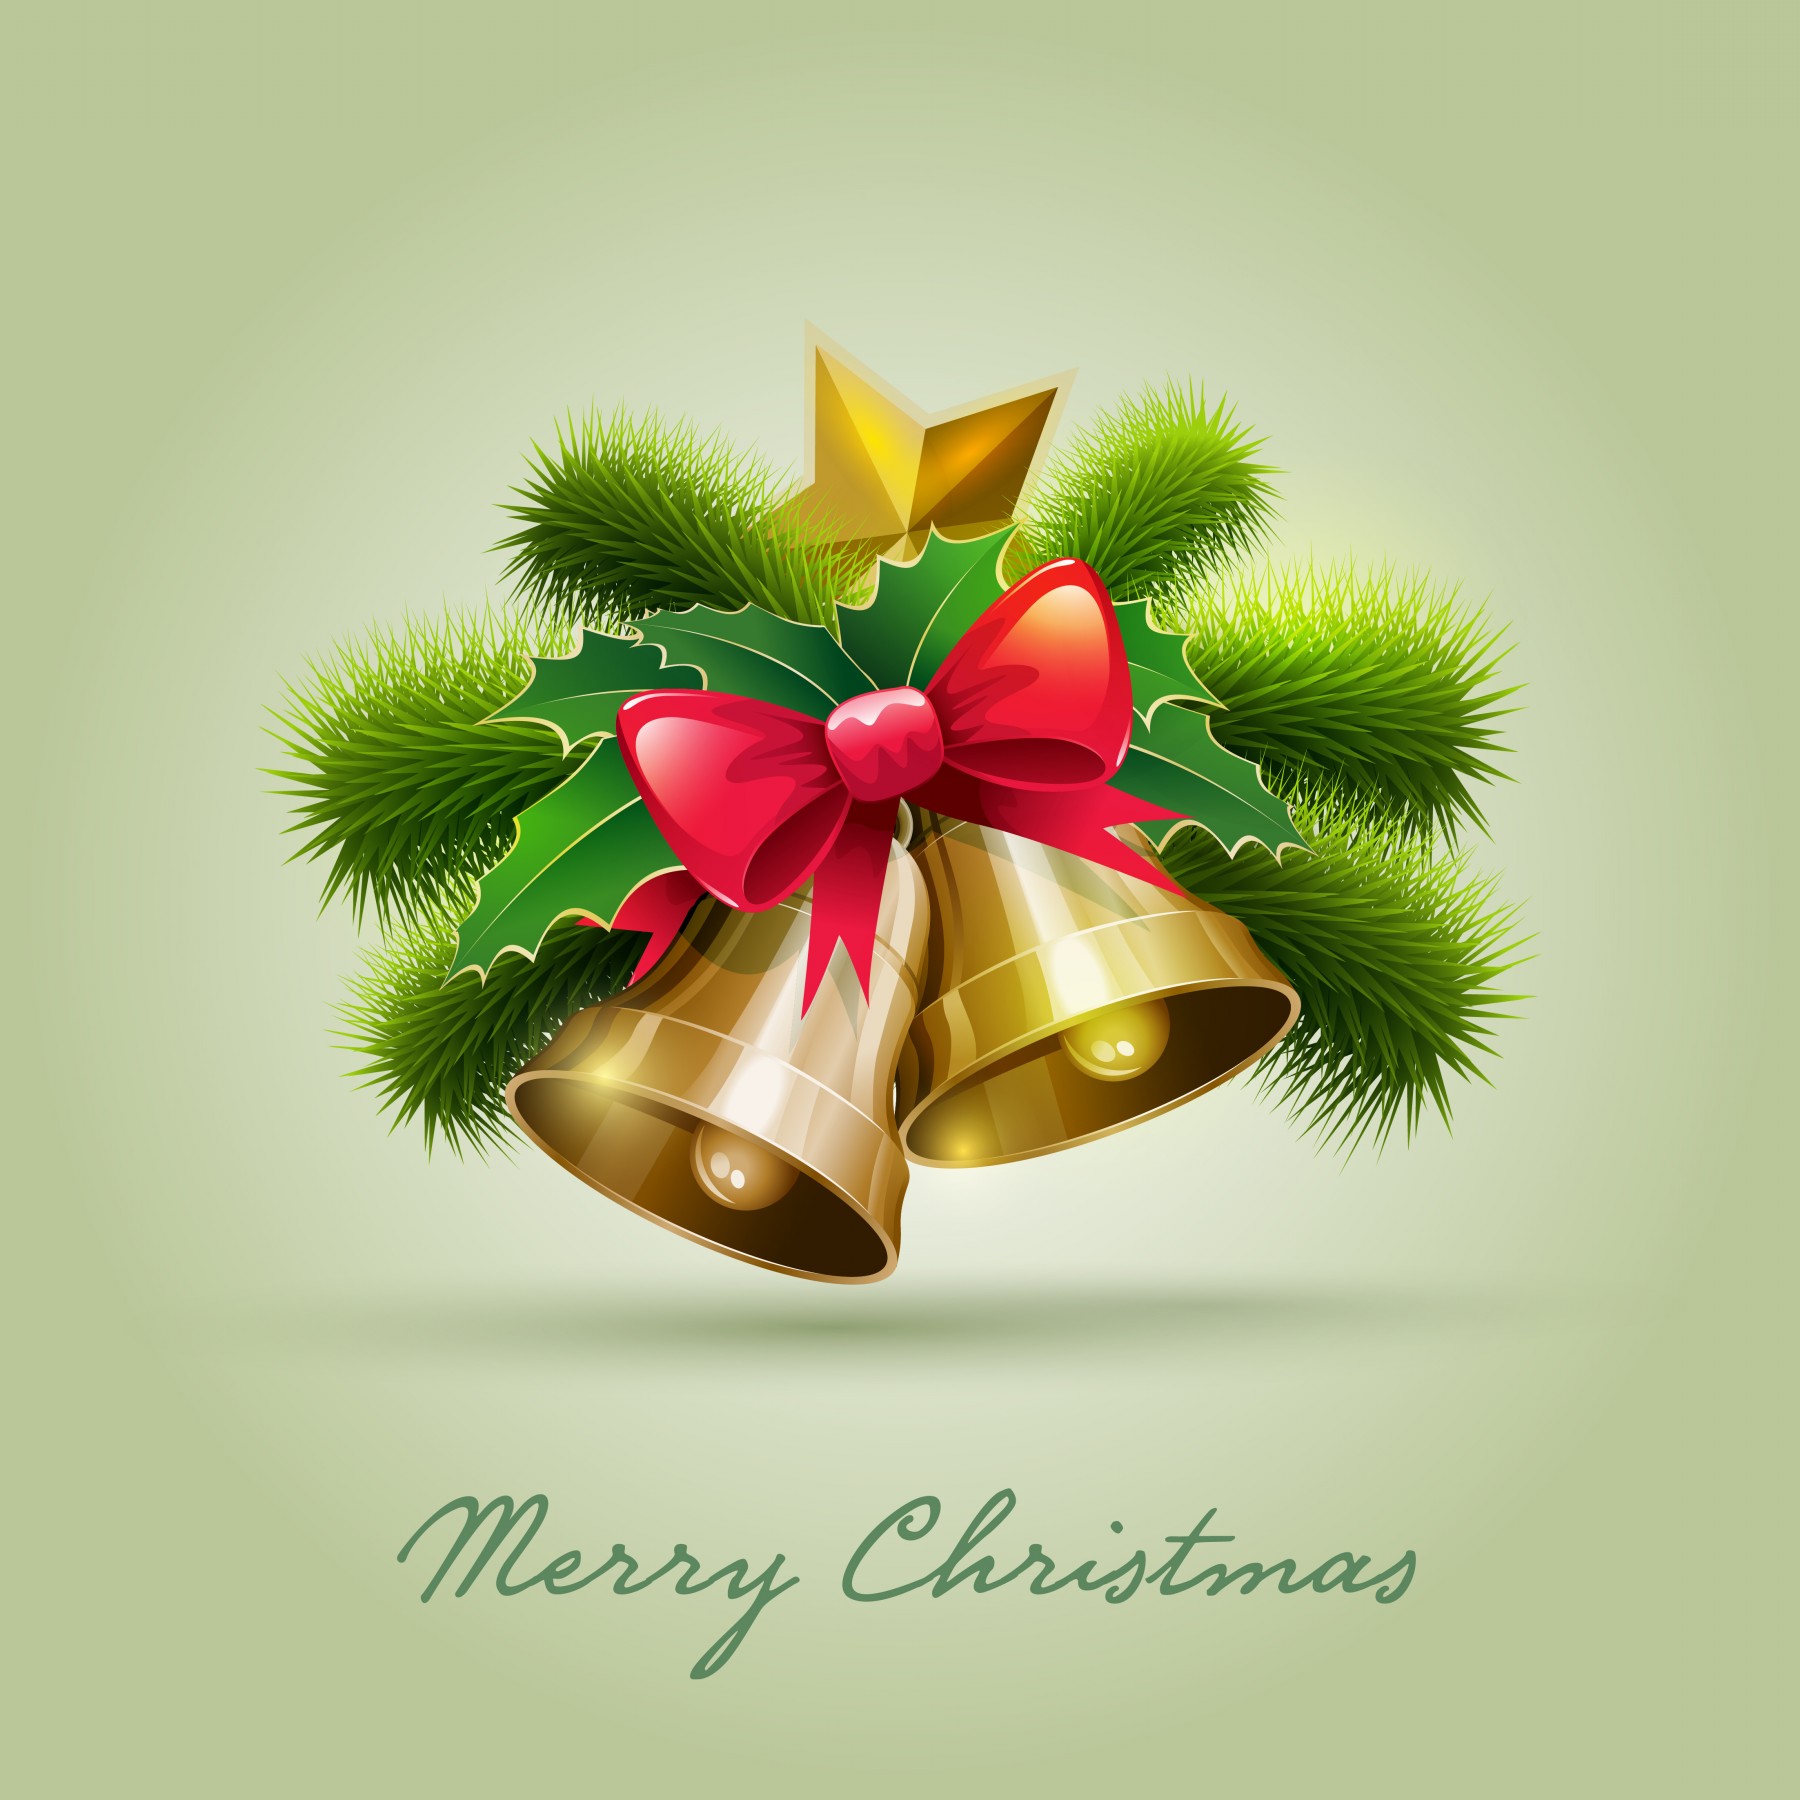  Merry Christmas Messages and Greetings